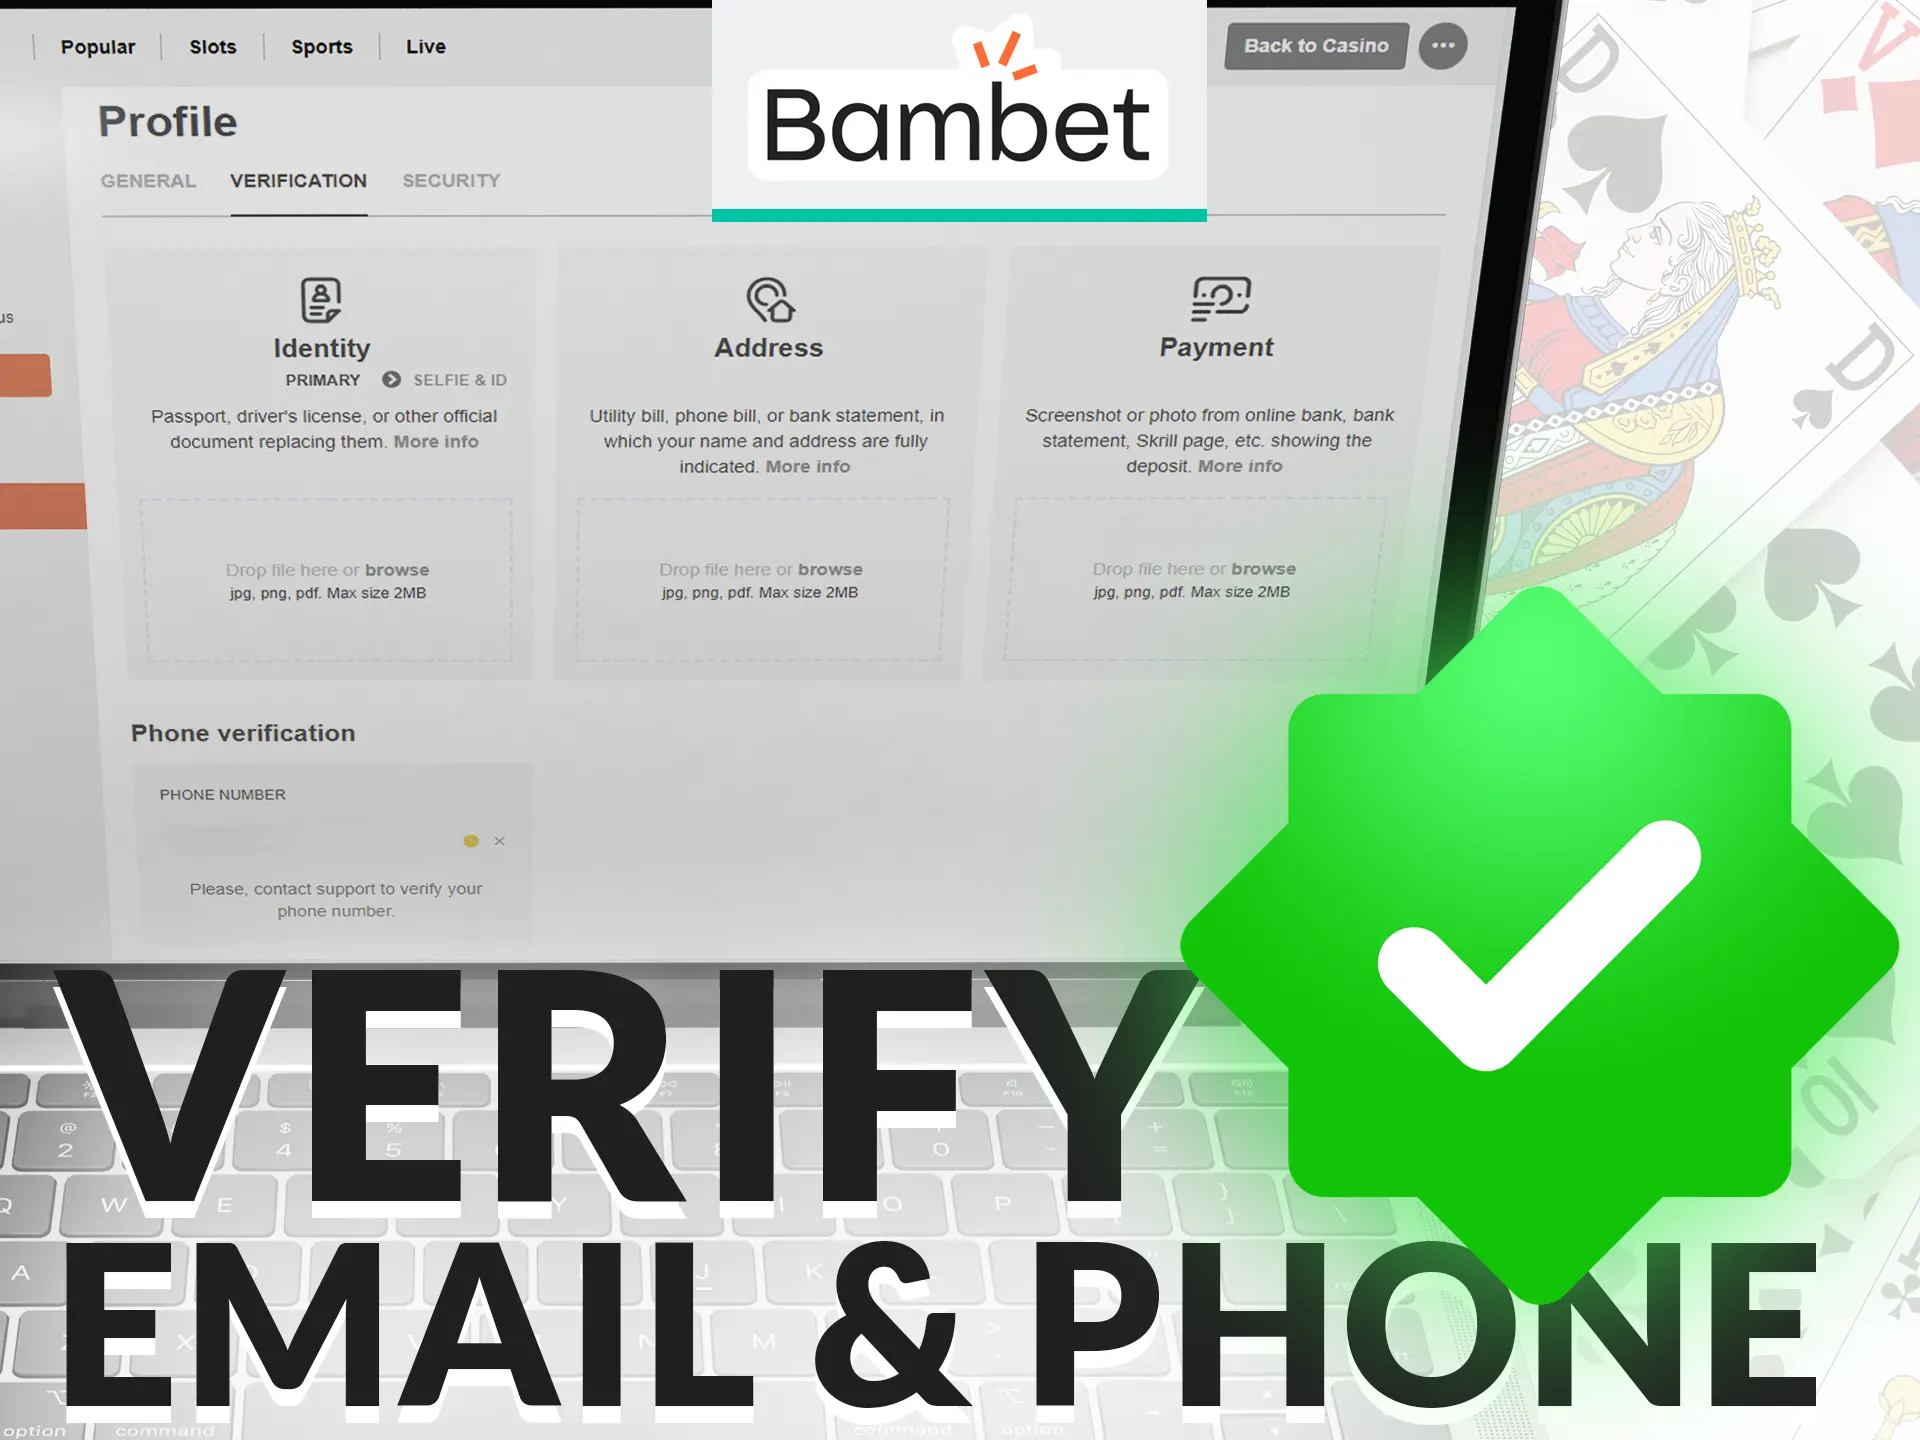 Go through the verification process to complete your registration on the Bambet website.